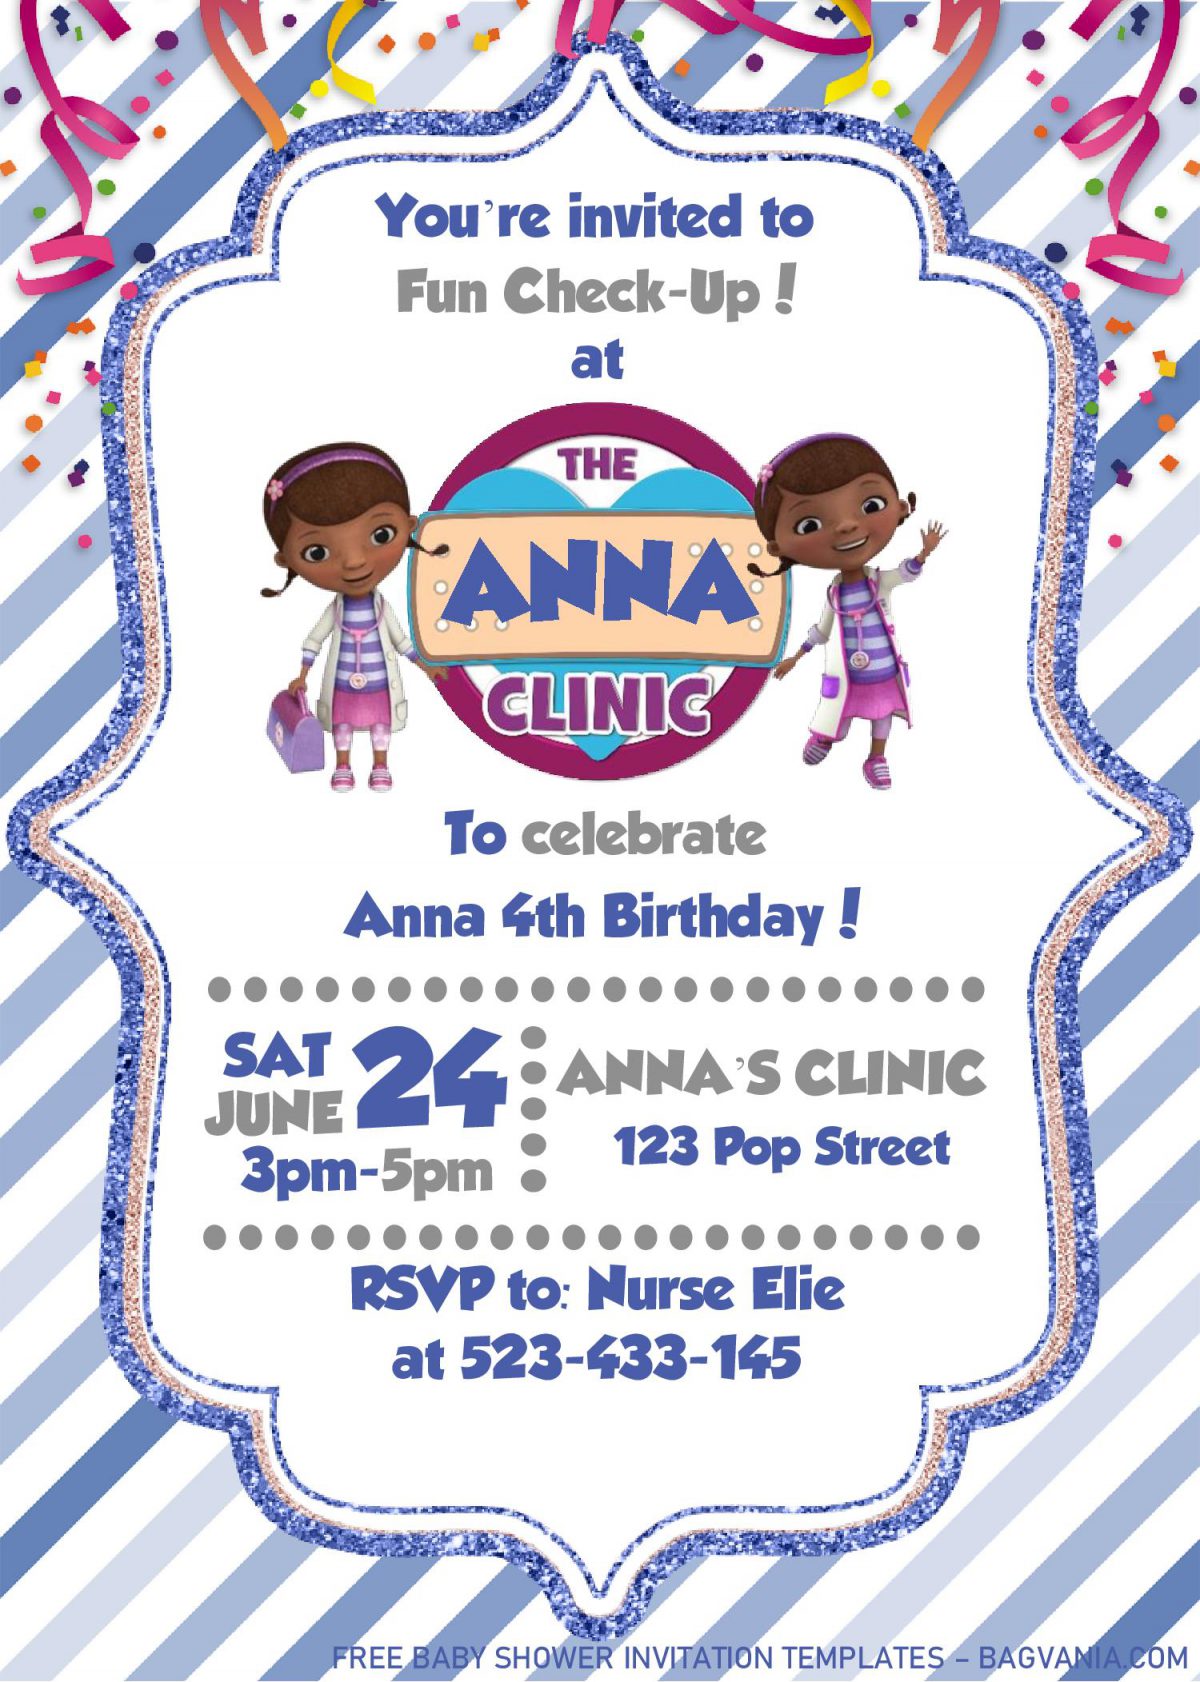 Doc McStuffins Birthday Invitation Templates - Editable With MS Word and has glitter text frame